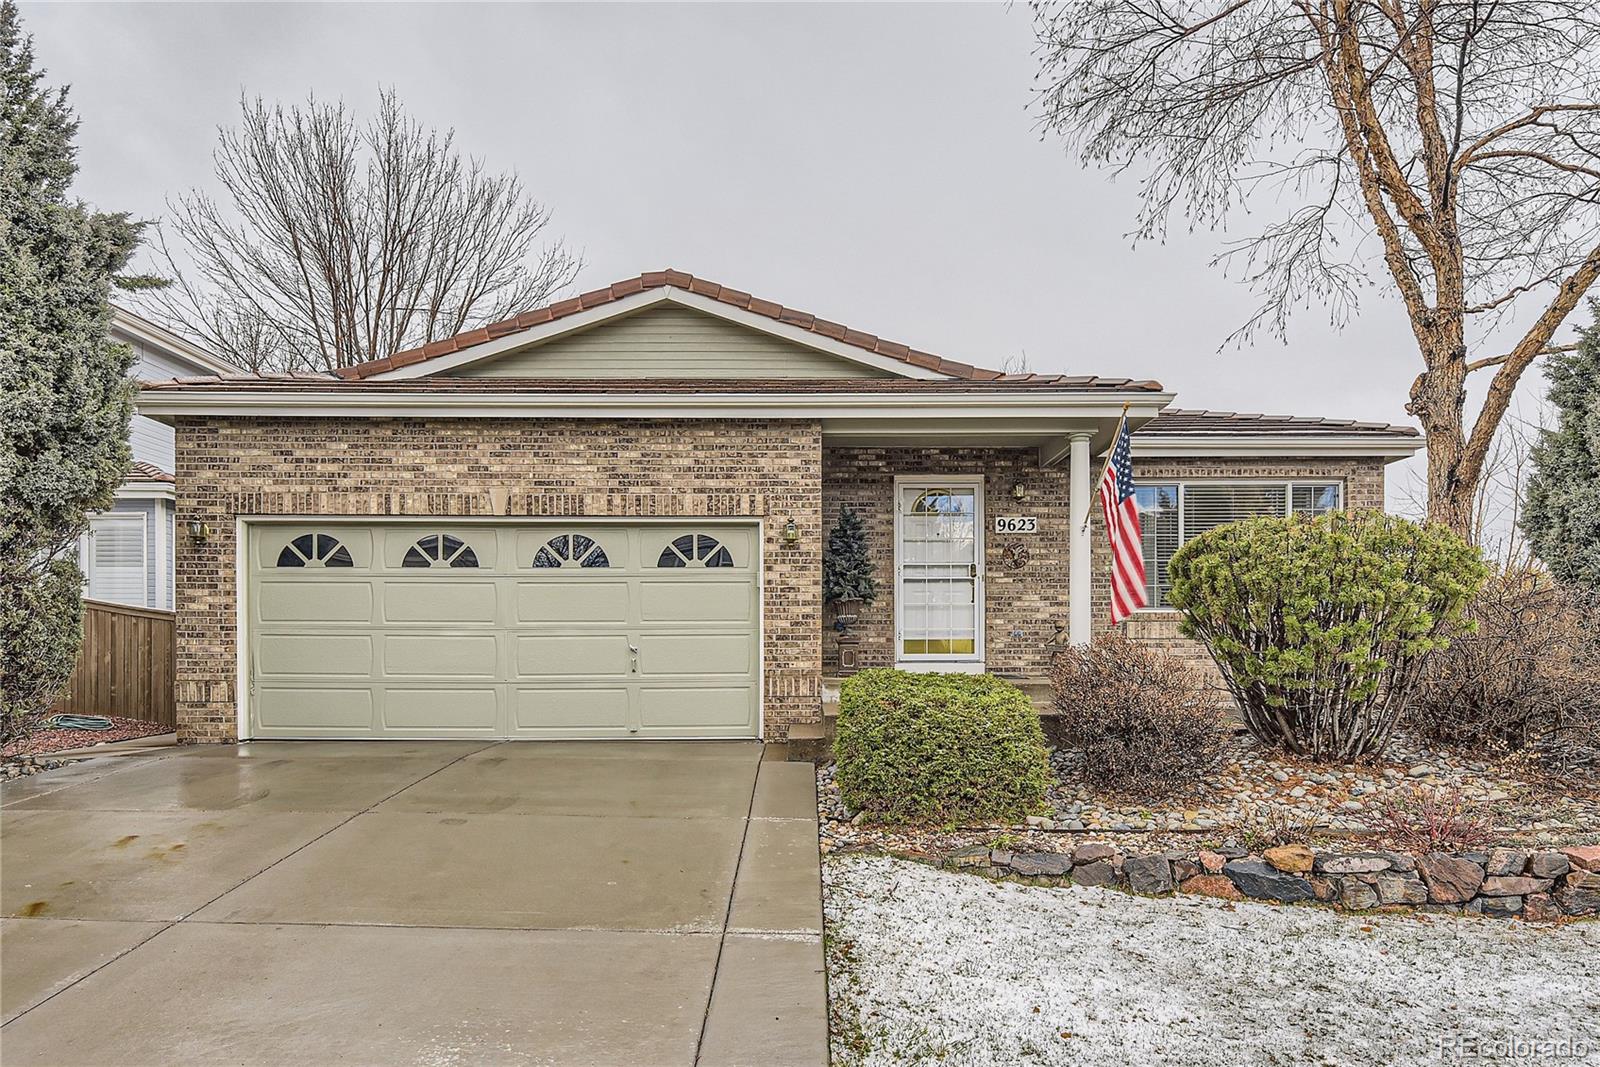 Report Image for 9623  Townsville Circle,Highlands Ranch, Colorado